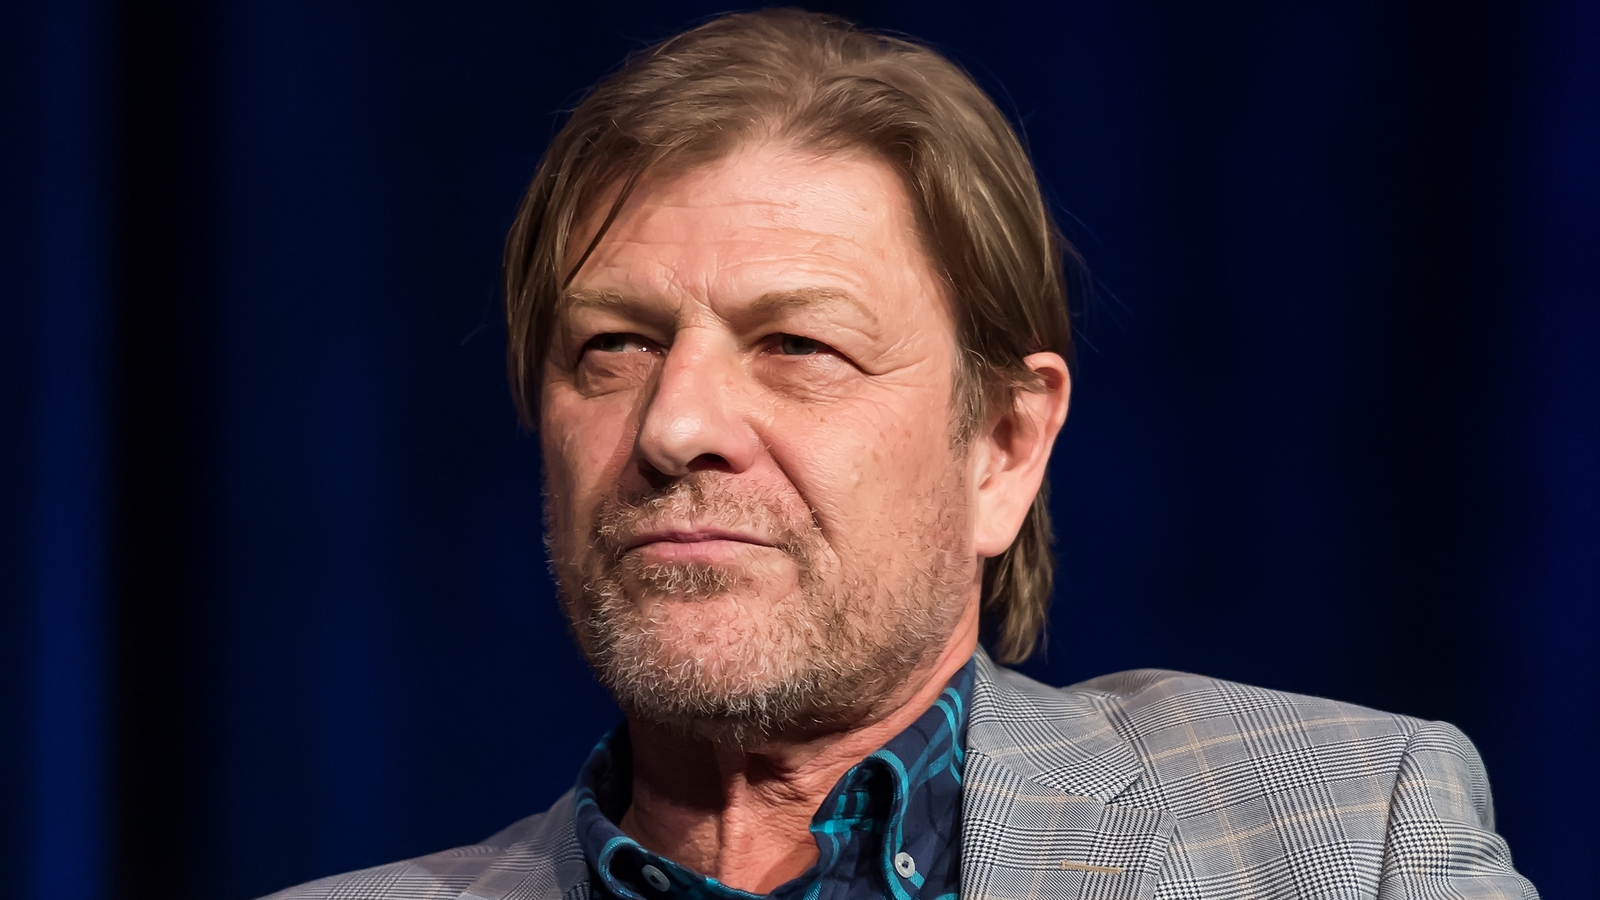 Sean Bean weighs in on state of masculinity